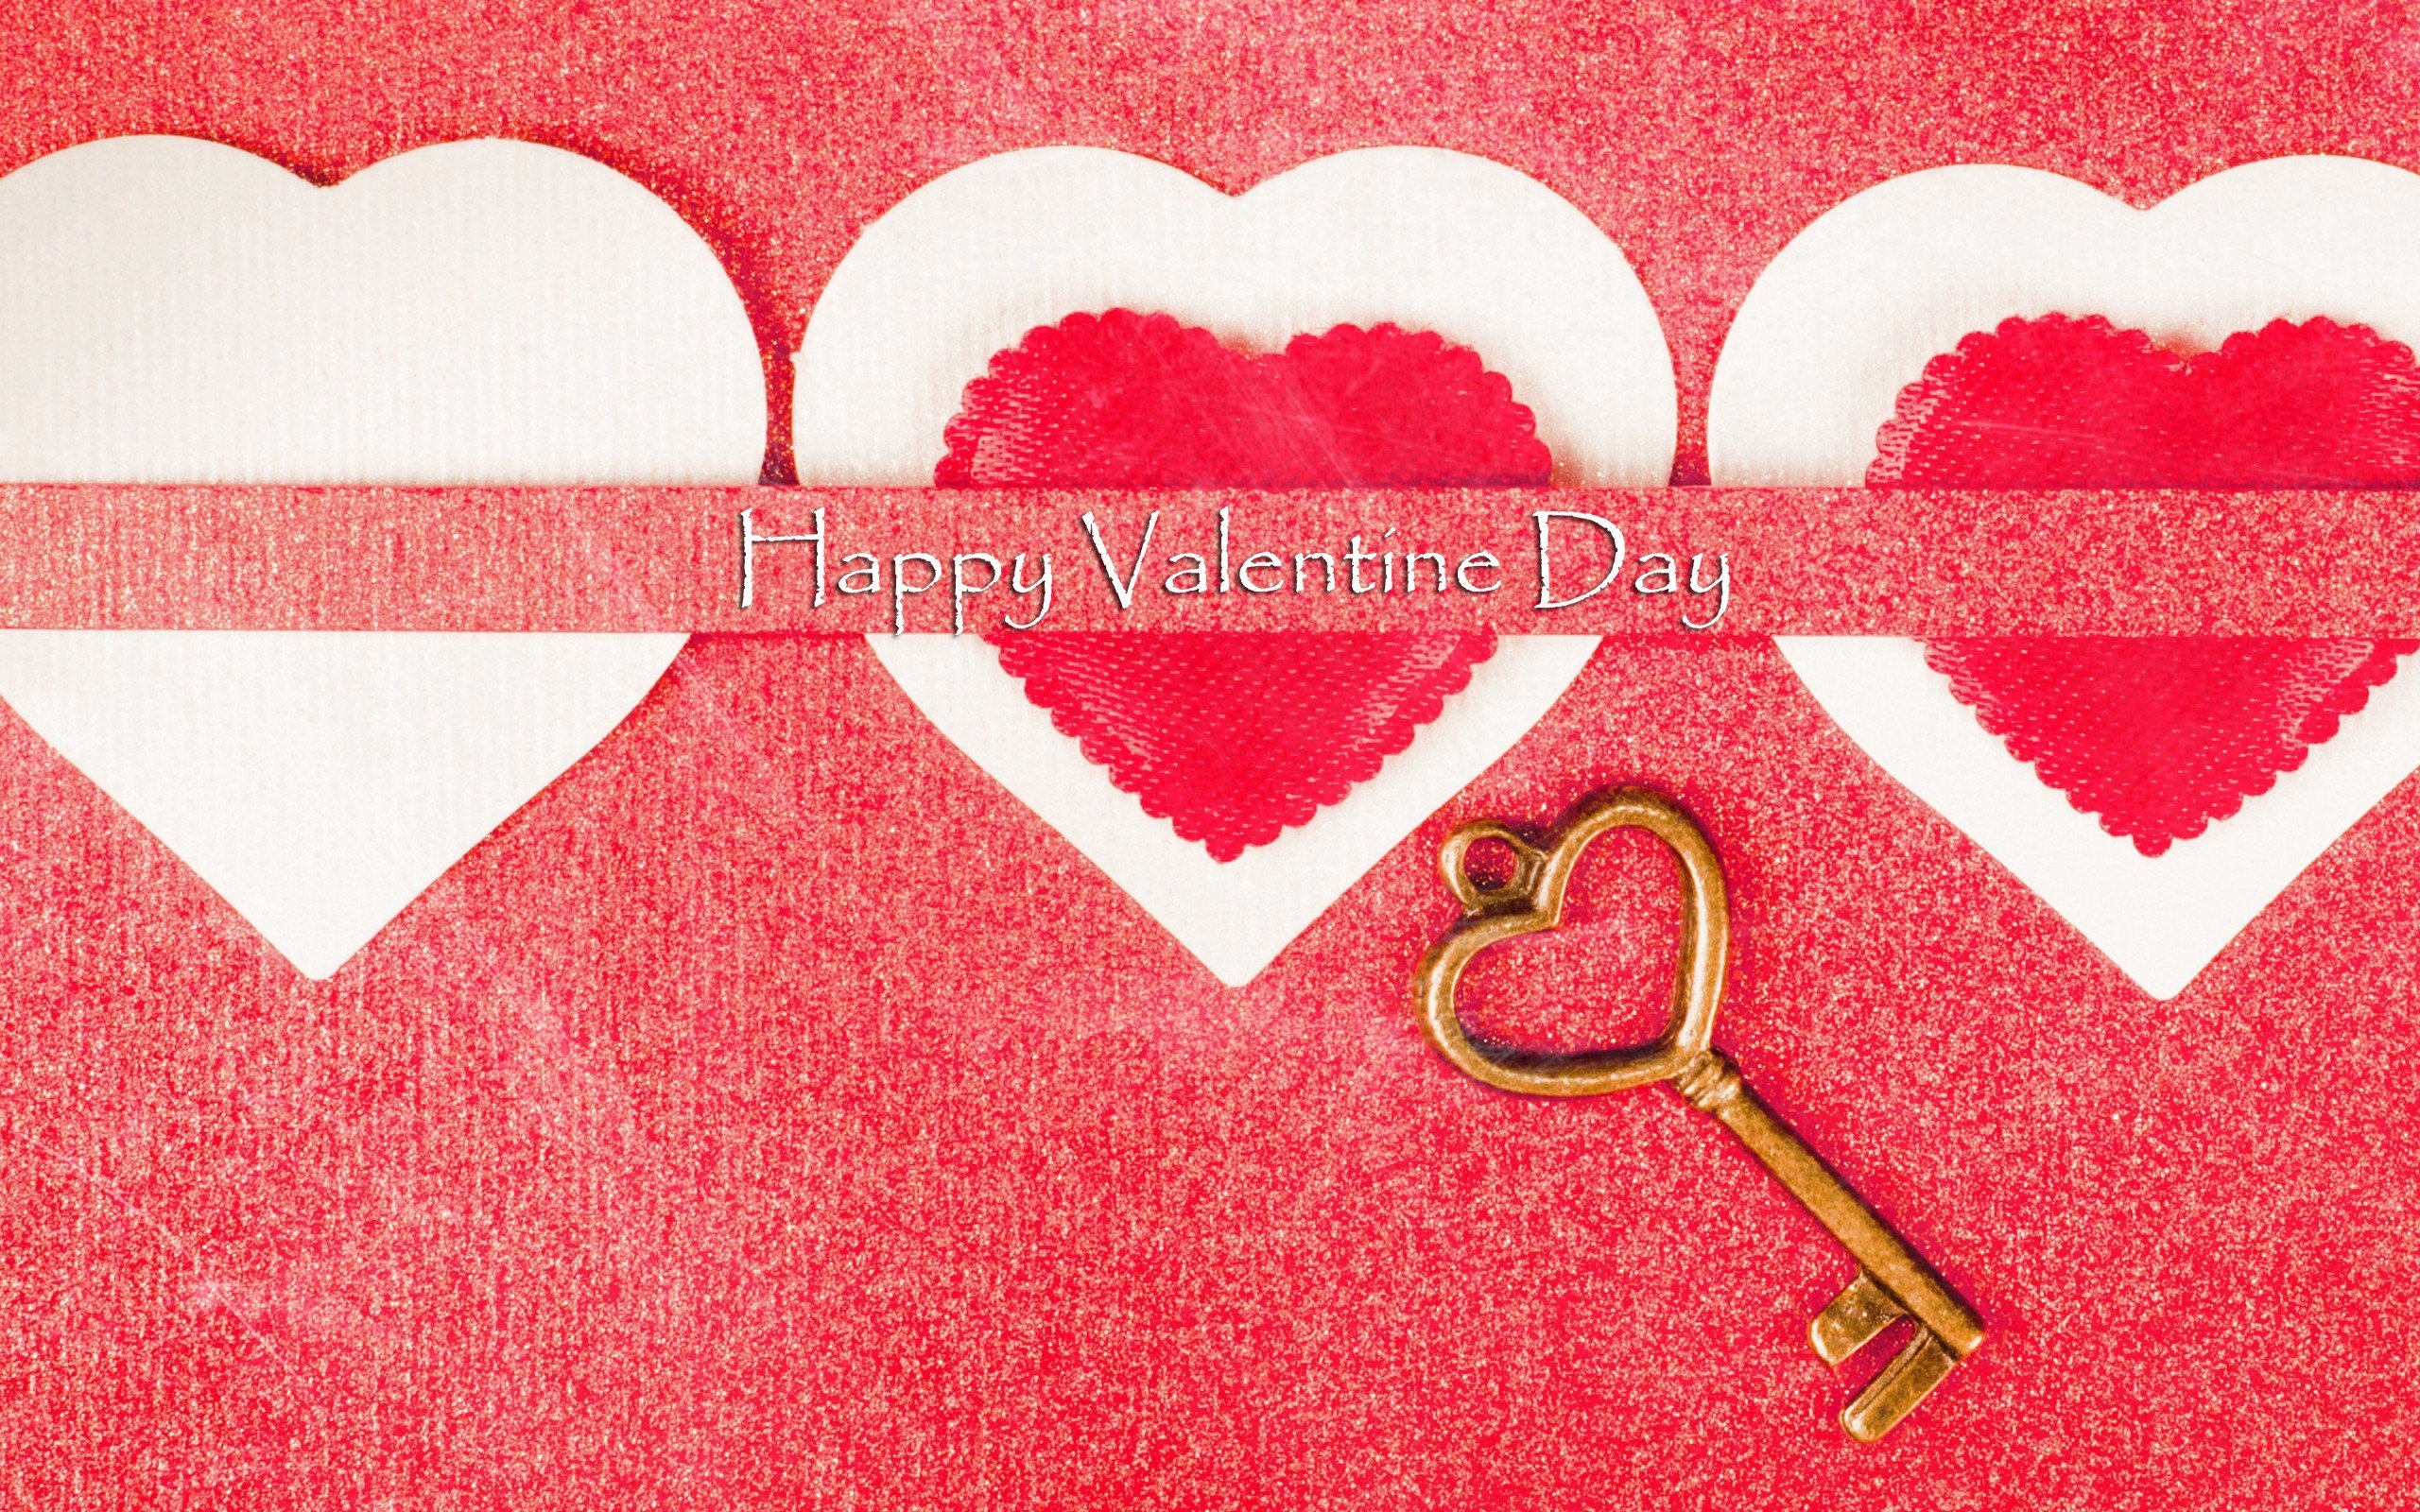 Happy Valentines Day Love Heart Key Wallpaper   New HD Wallpapers